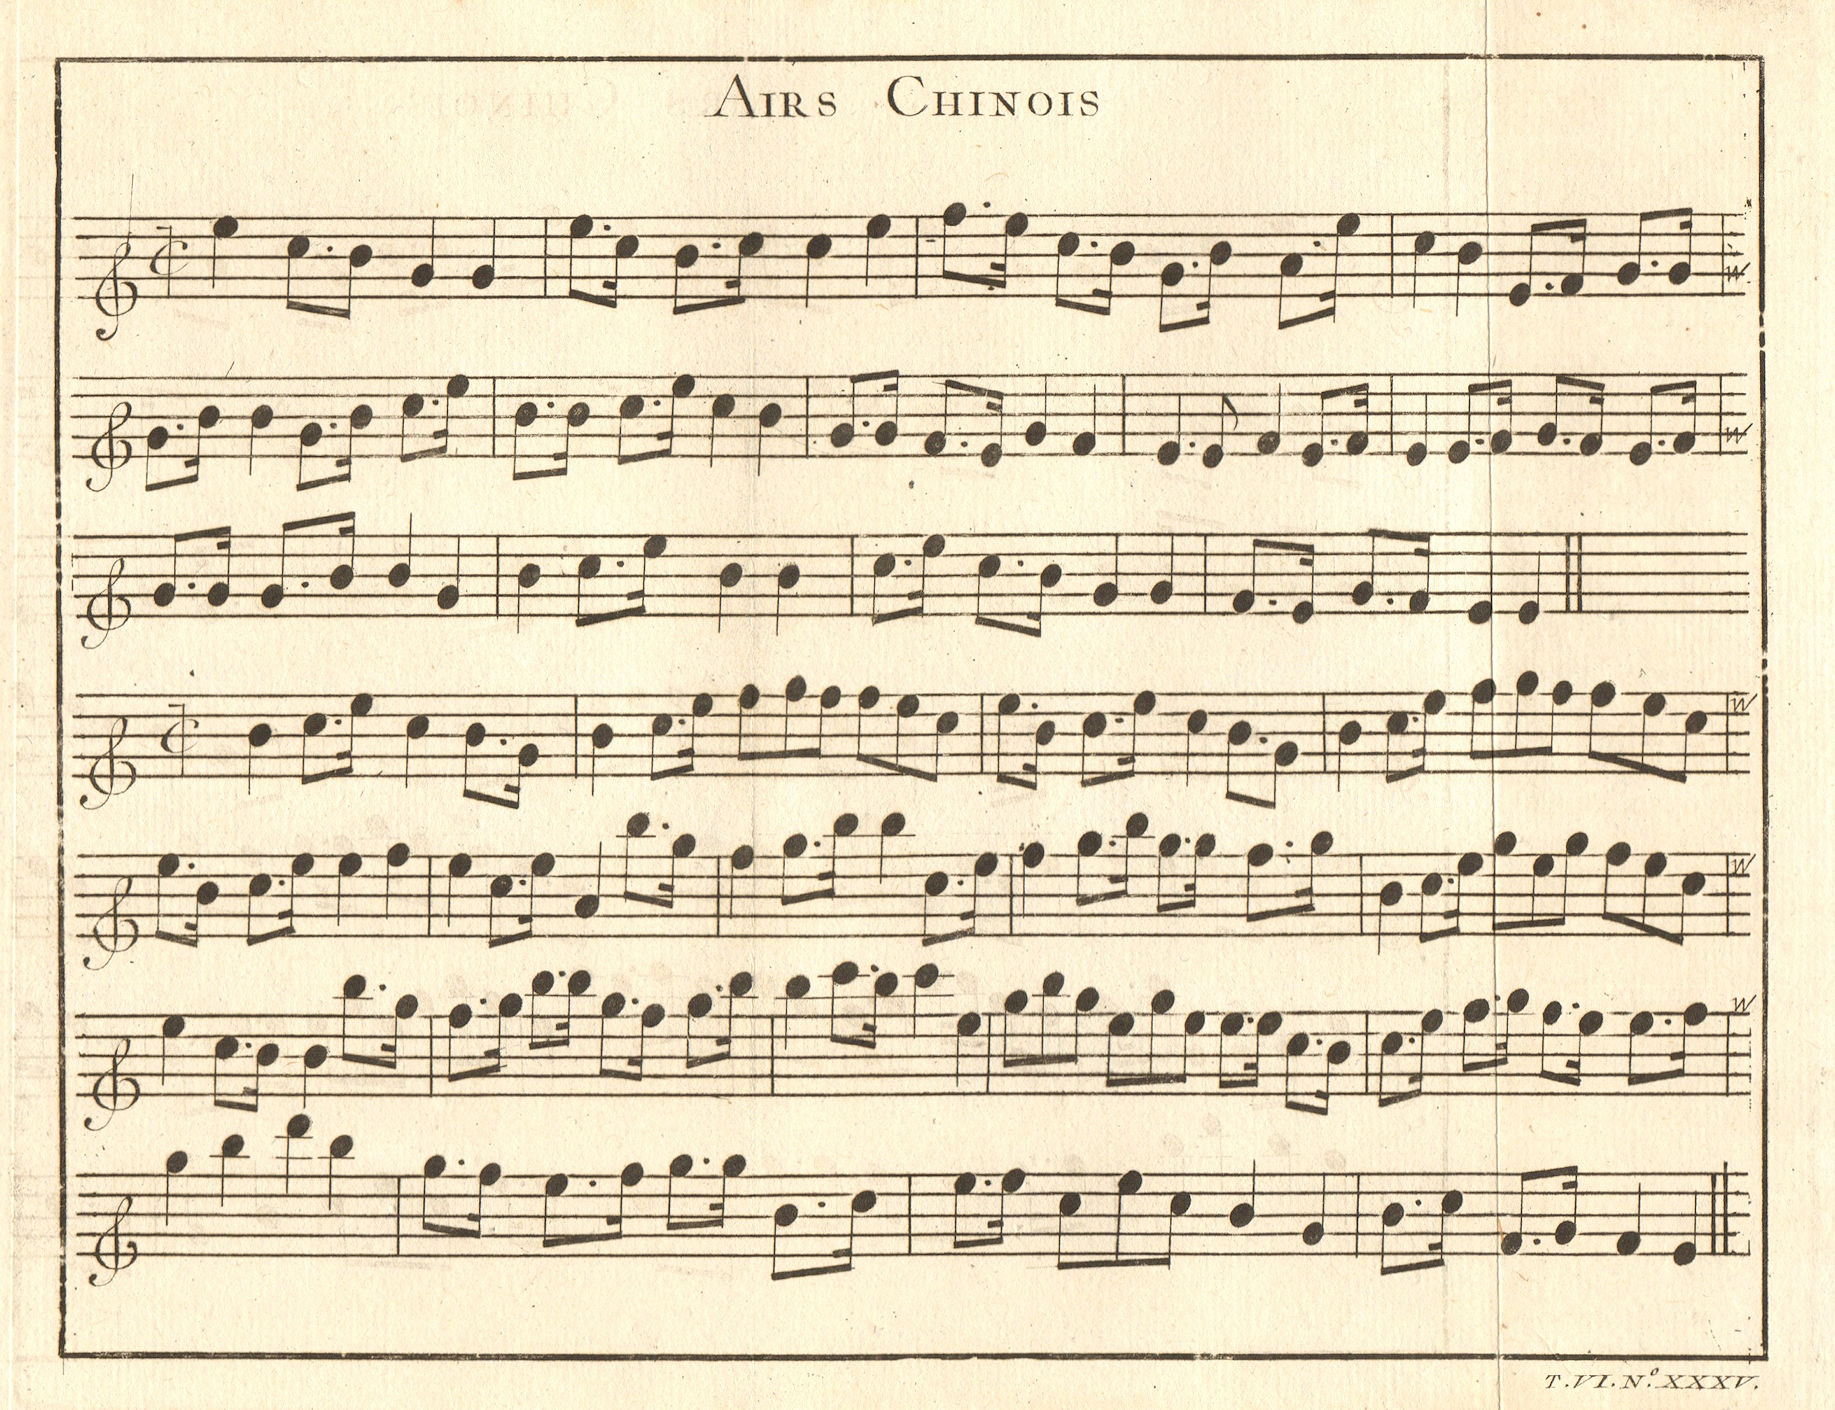 Associate Product 'Airs Chinois'. China. Chinese aria song sheet music.  1748 old antique print